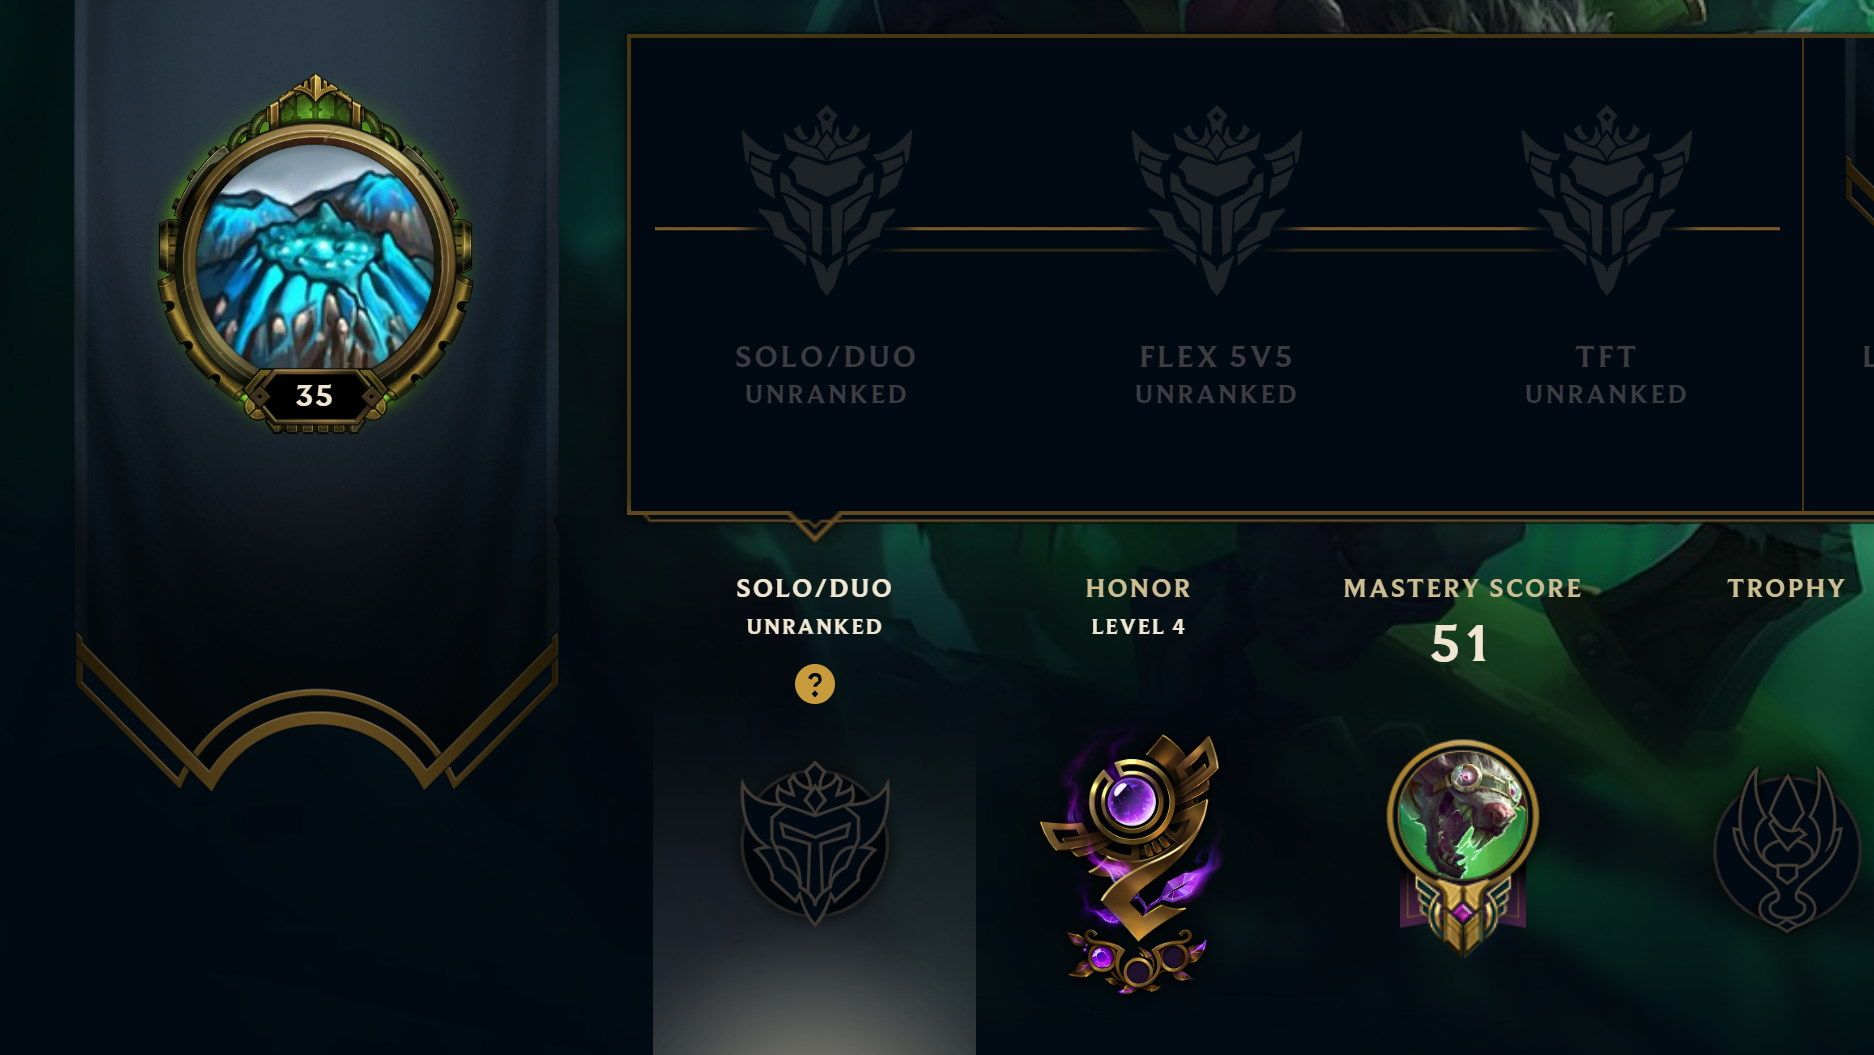 Unranked Account in LoL